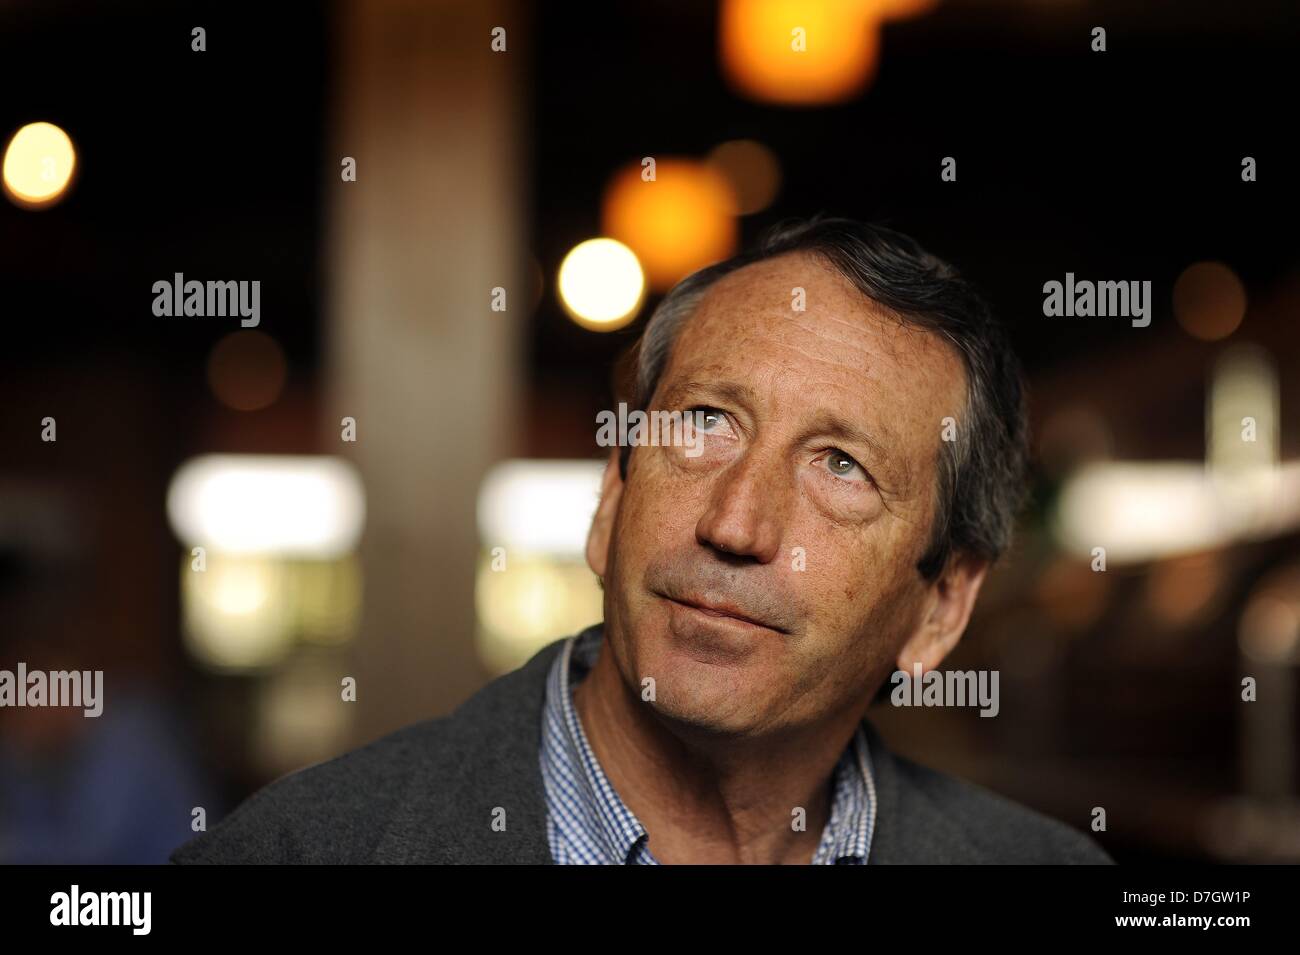 Feb. 8, 2013 - Charleston, South Carolina, U.S. - Former South Carolina Governor MARK SANFORD visits the Saffron Bakery while campaigning for the March 19 congressional primary, Friday. The race is to fill the seat left vacant when Congressman Scott was appointed to the Senate. (Credit Image: © Stephen Morton/ZUMAPRESS.com) Stock Photo